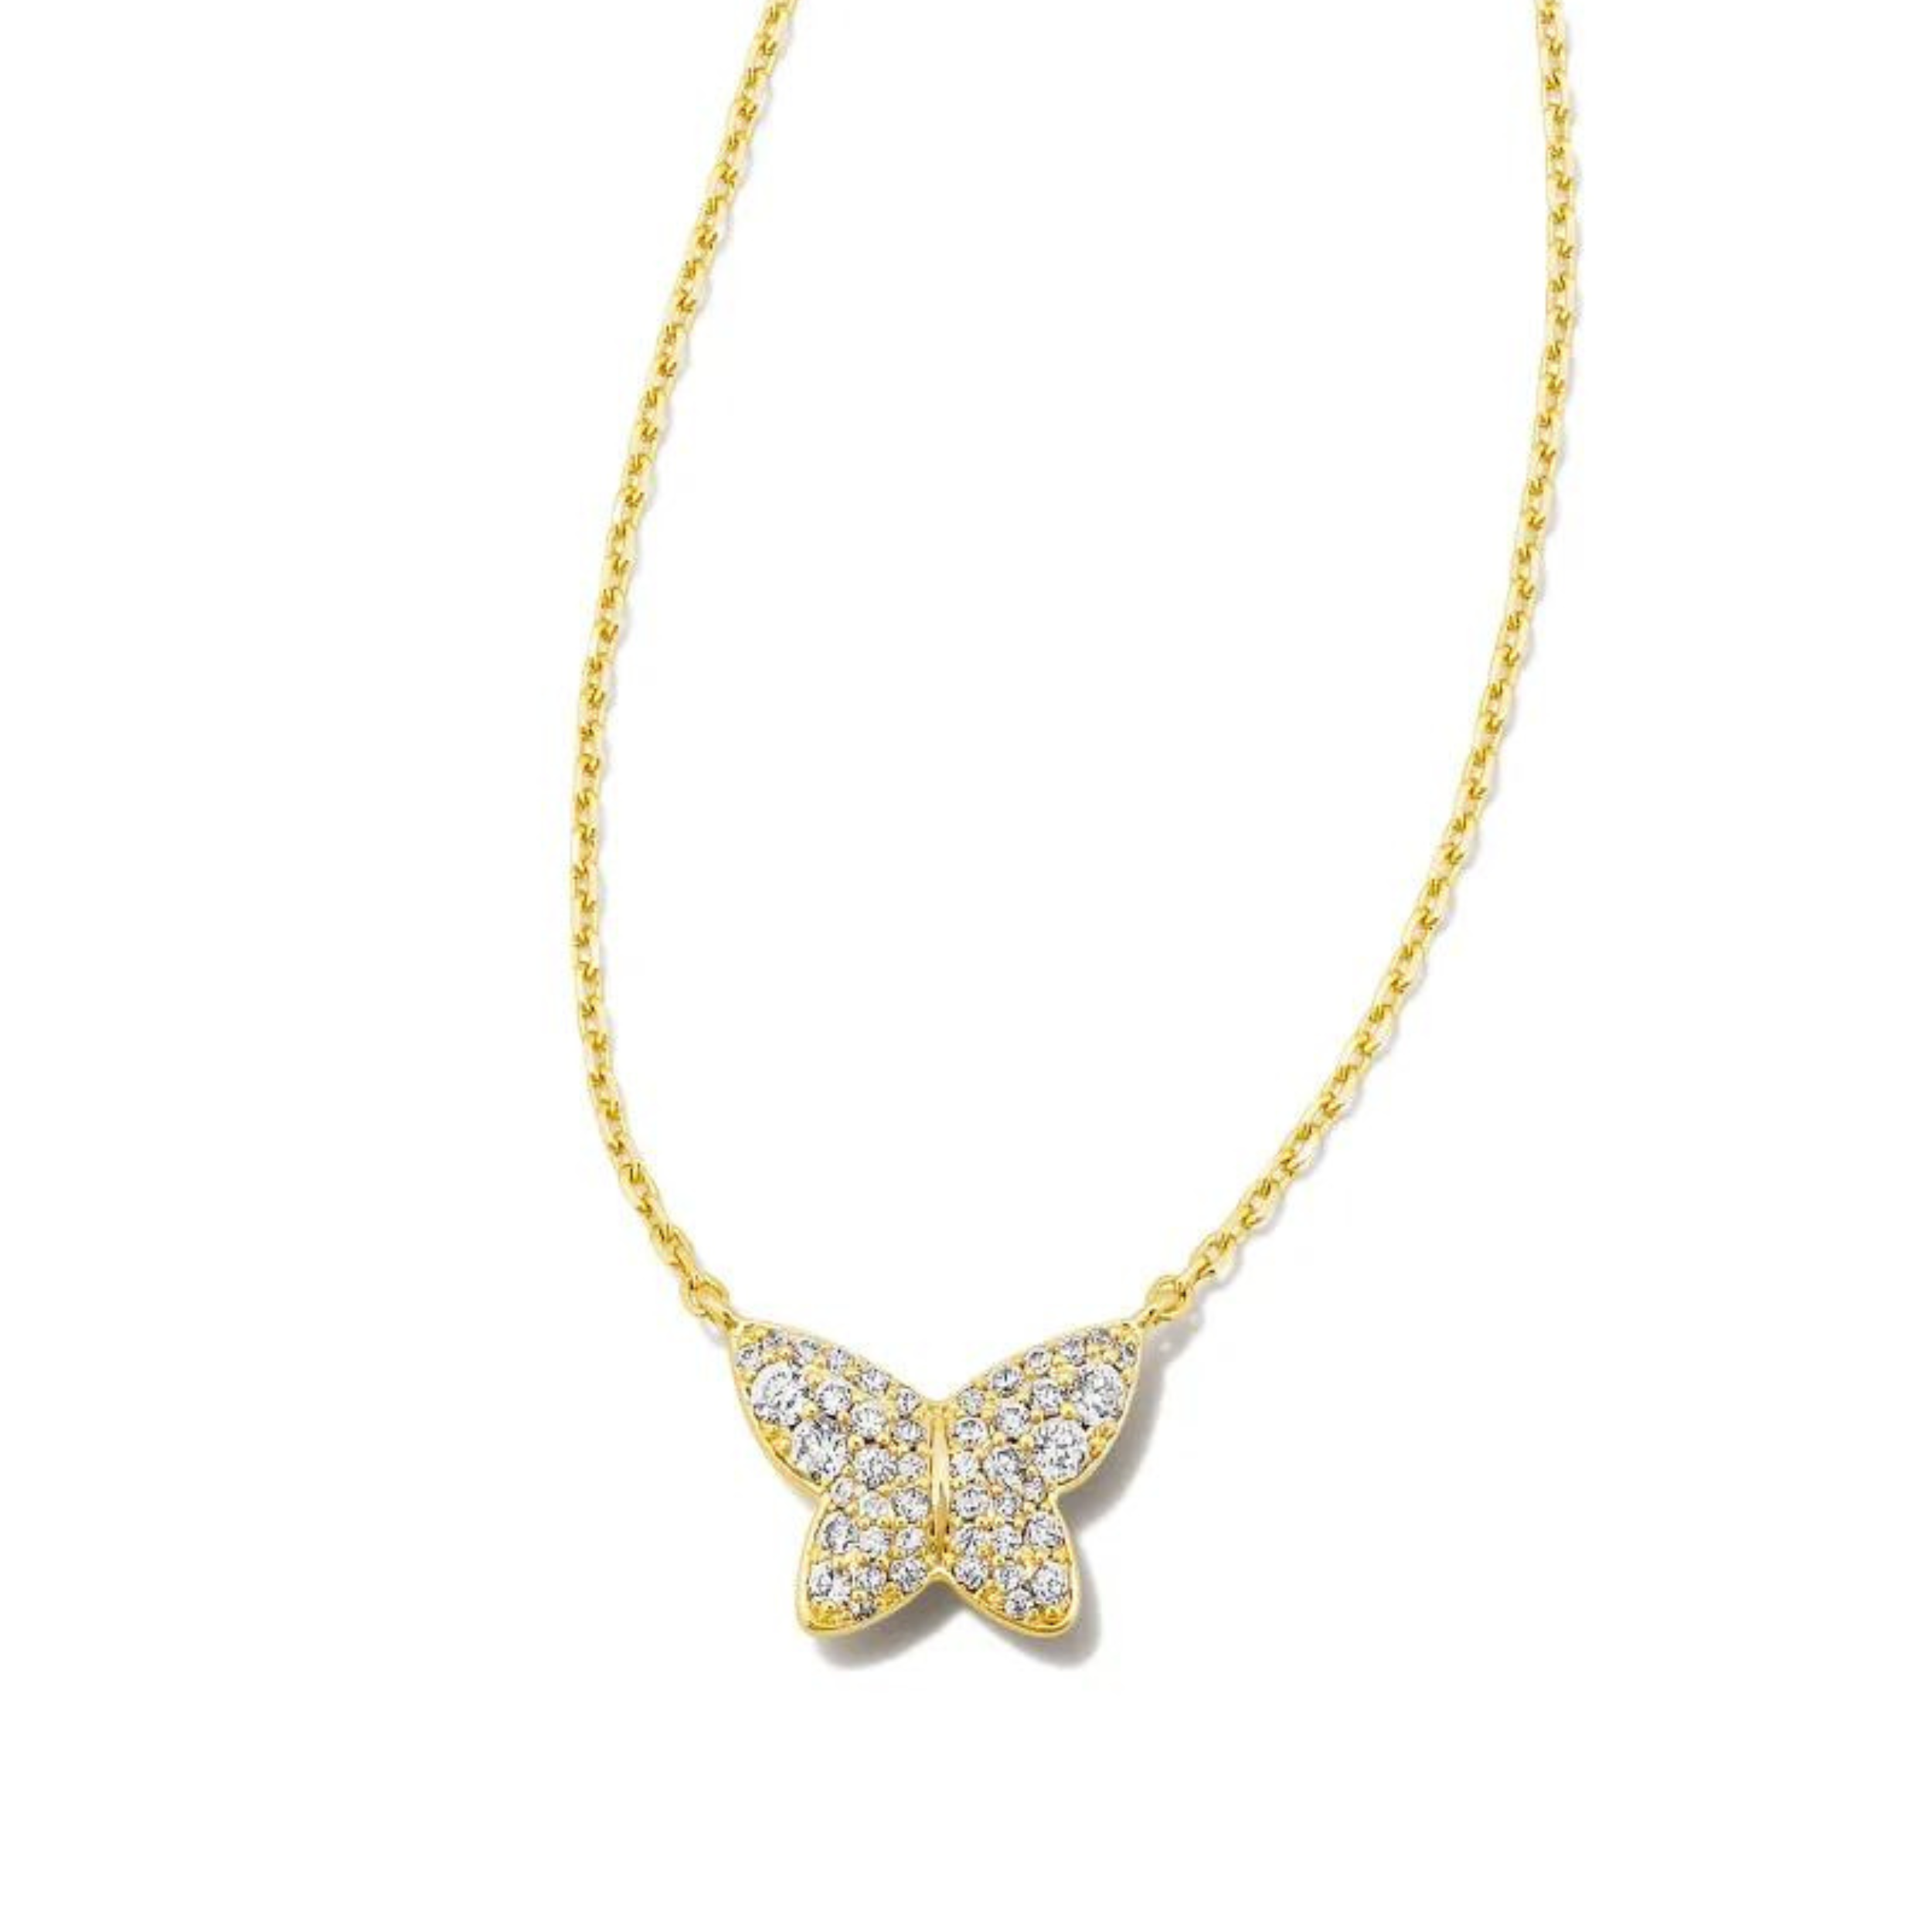 Gold necklace with a butterfly pendant with white crystals, pictured on a white background.